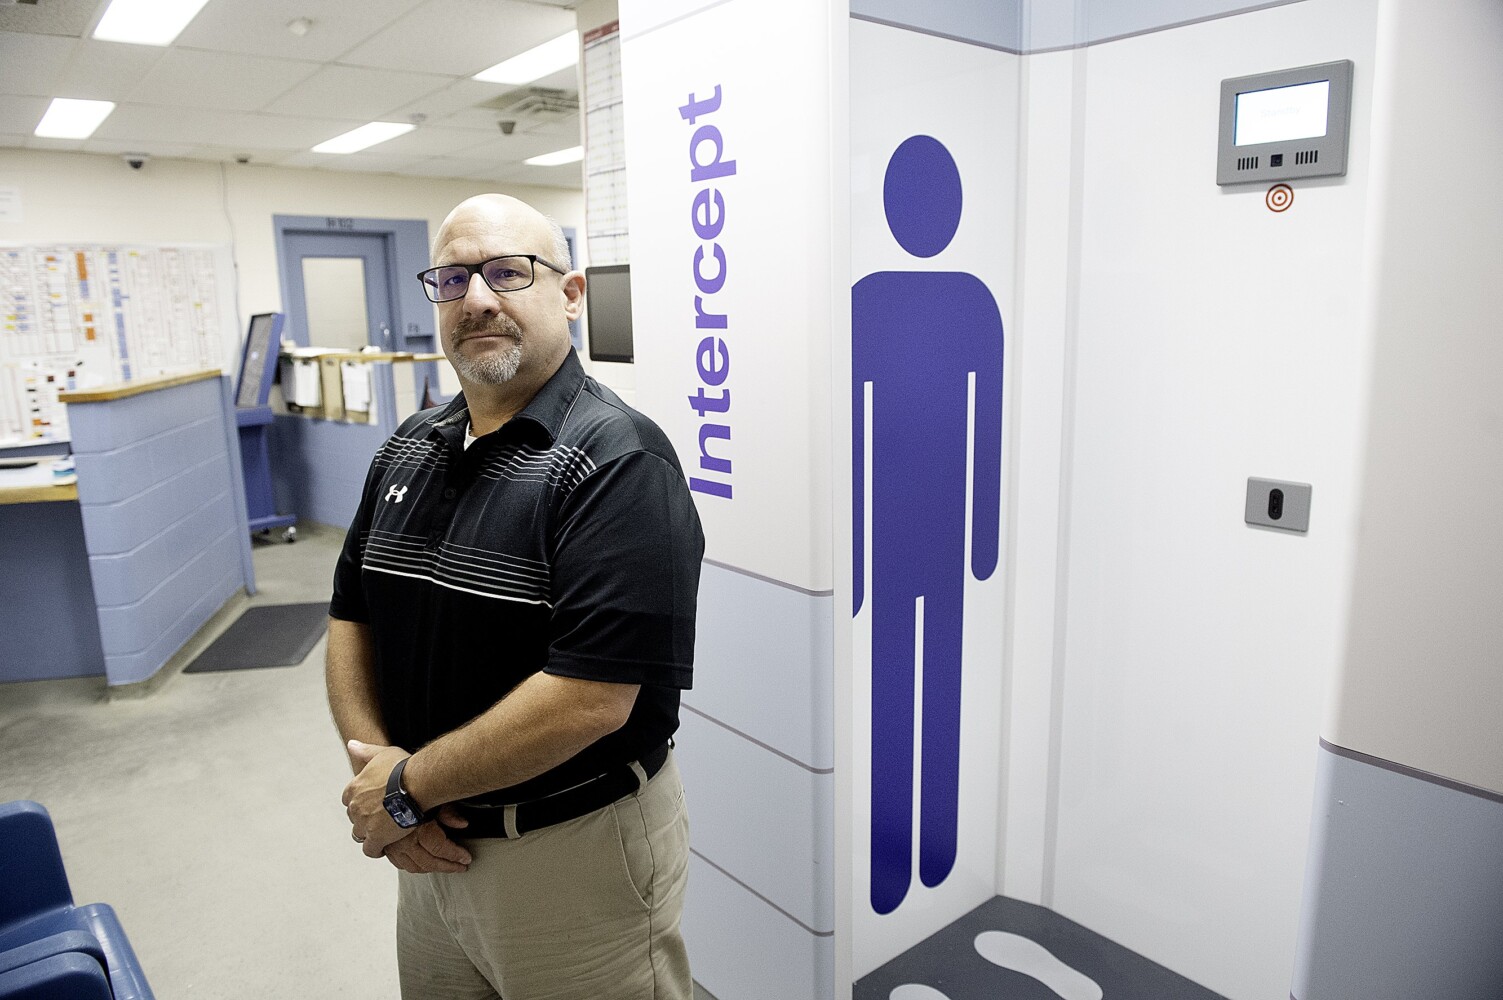 Body scanners that detect contraband arrive in some South Carolina